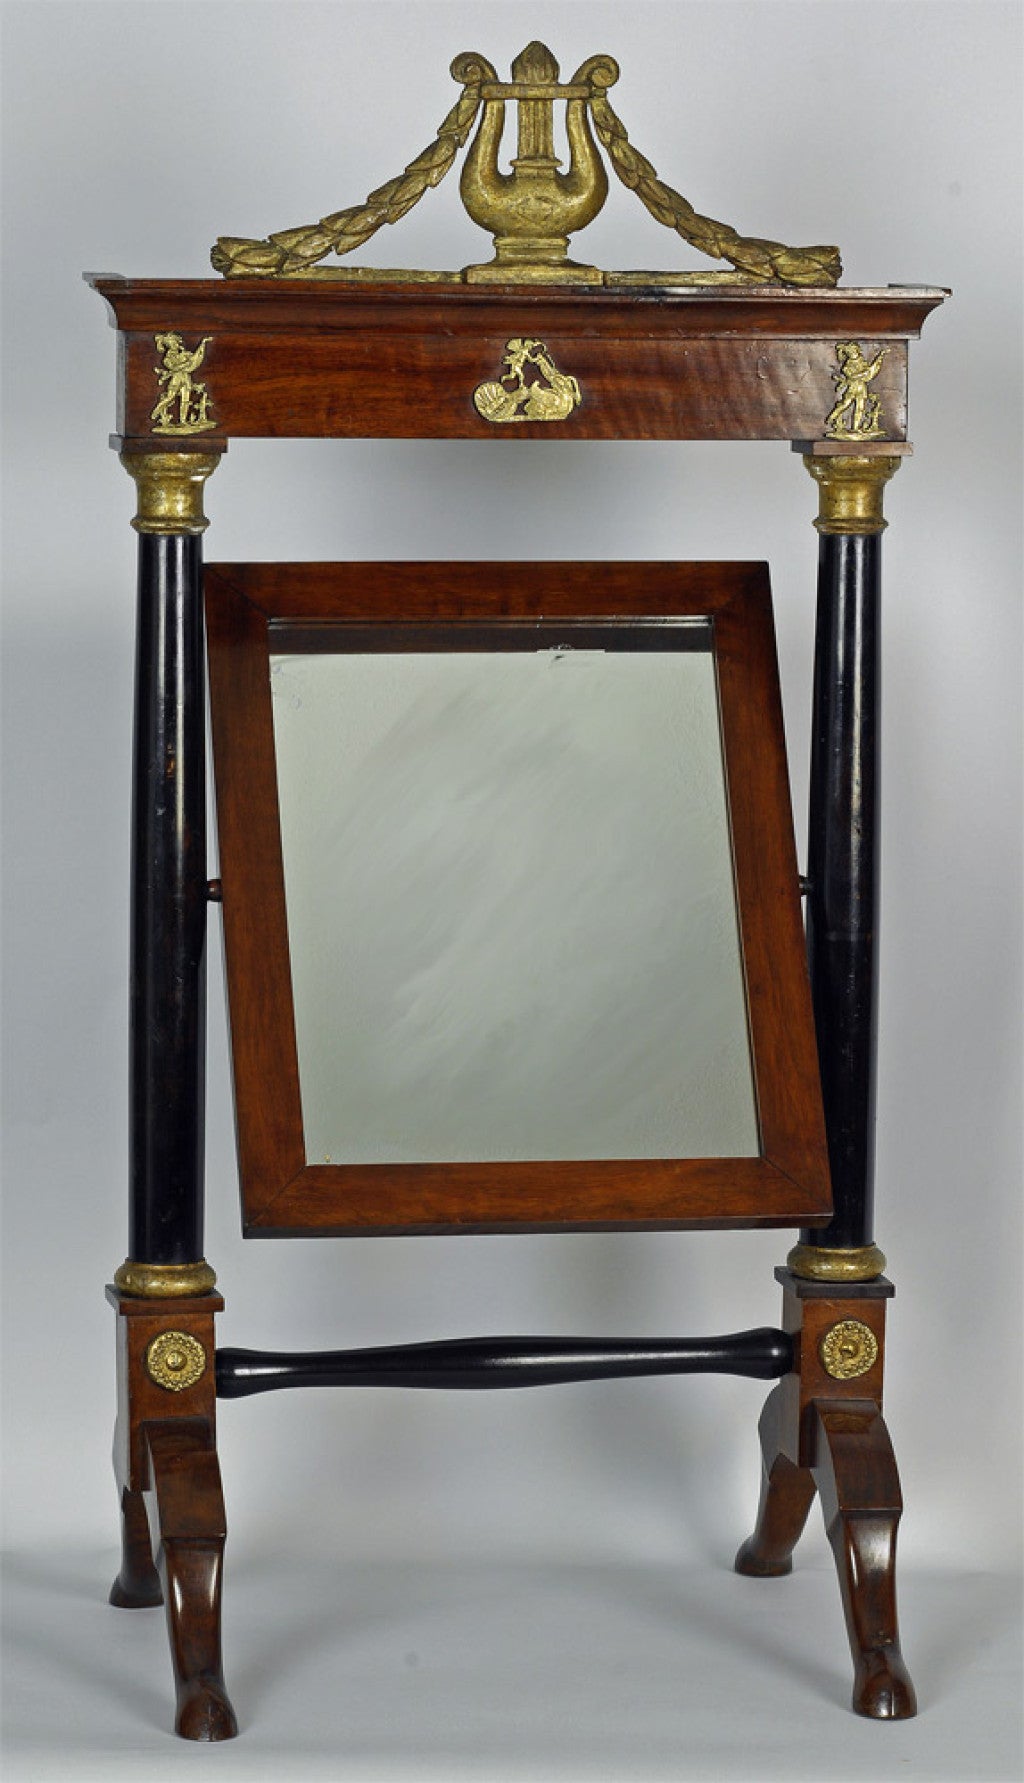 French Empire mahogany dressing table mirror, c1810, the case houses a “cheval style” mirror; it is surmounted by a gilt lyre and garland swag, the adjustable mirror is supported by ebonized columns, raised on a gilt brass-mounted trestle base.
N.P.